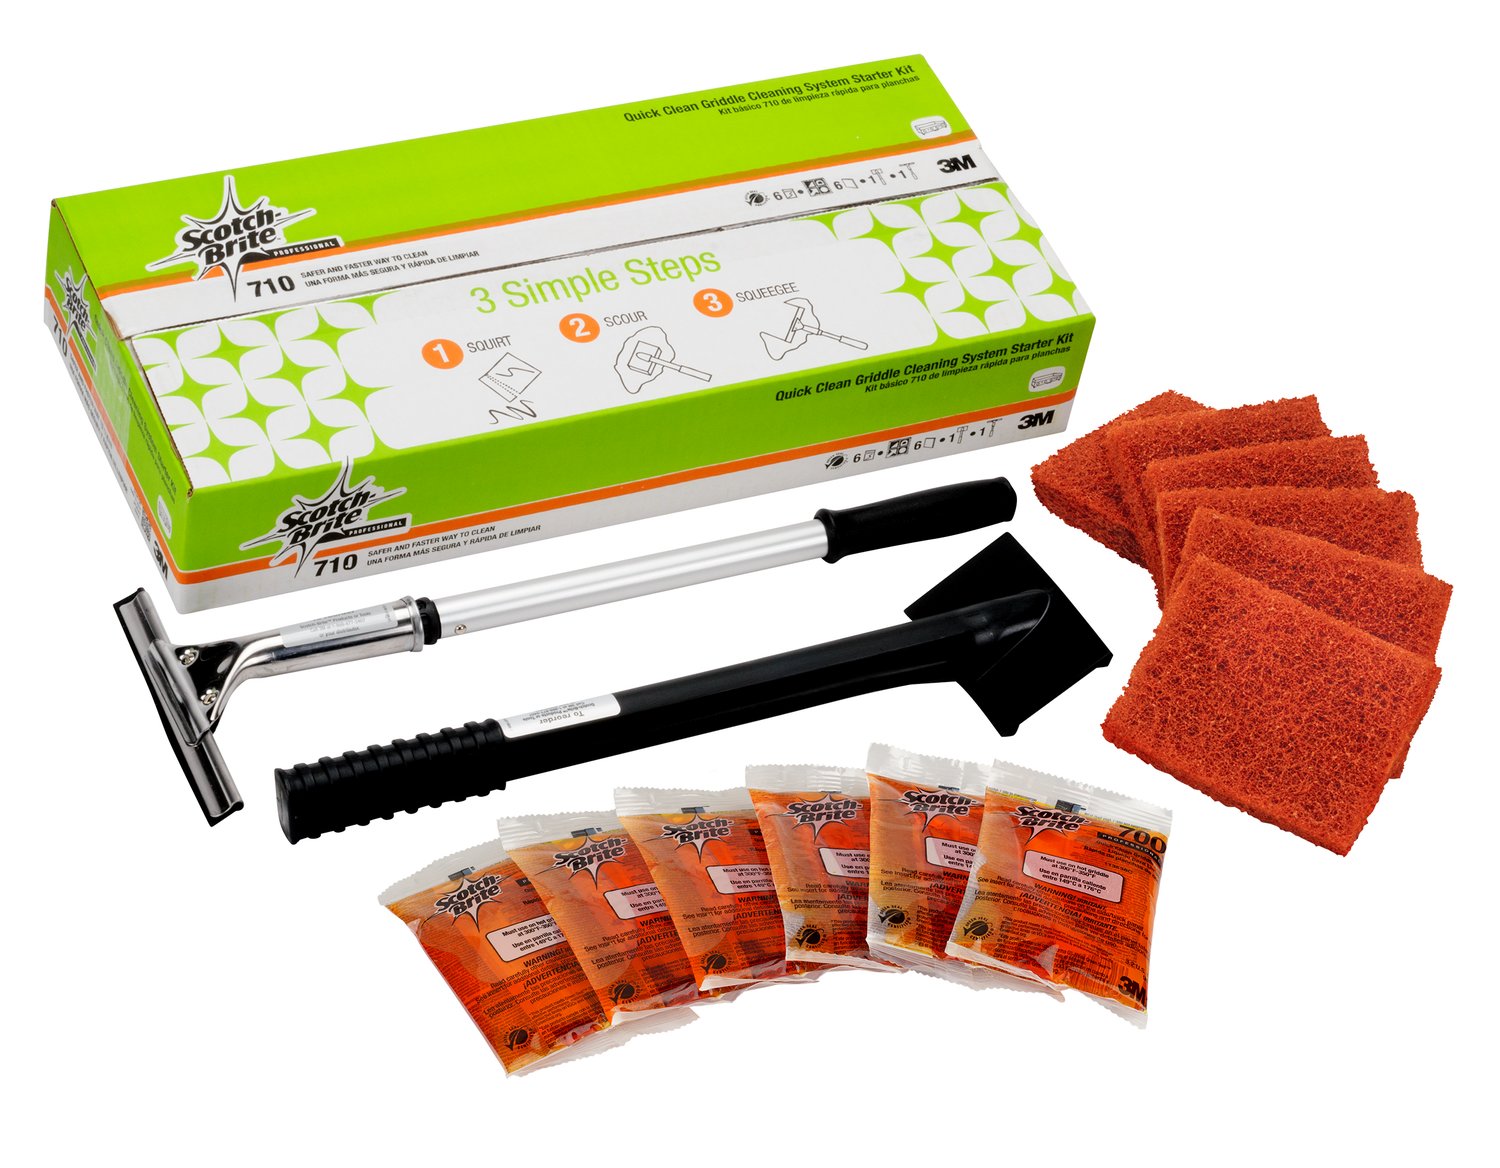 7100049397 - Scotch-Brite Quick Clean Griddle Cleaning System Starter Kit 710,
1/Case